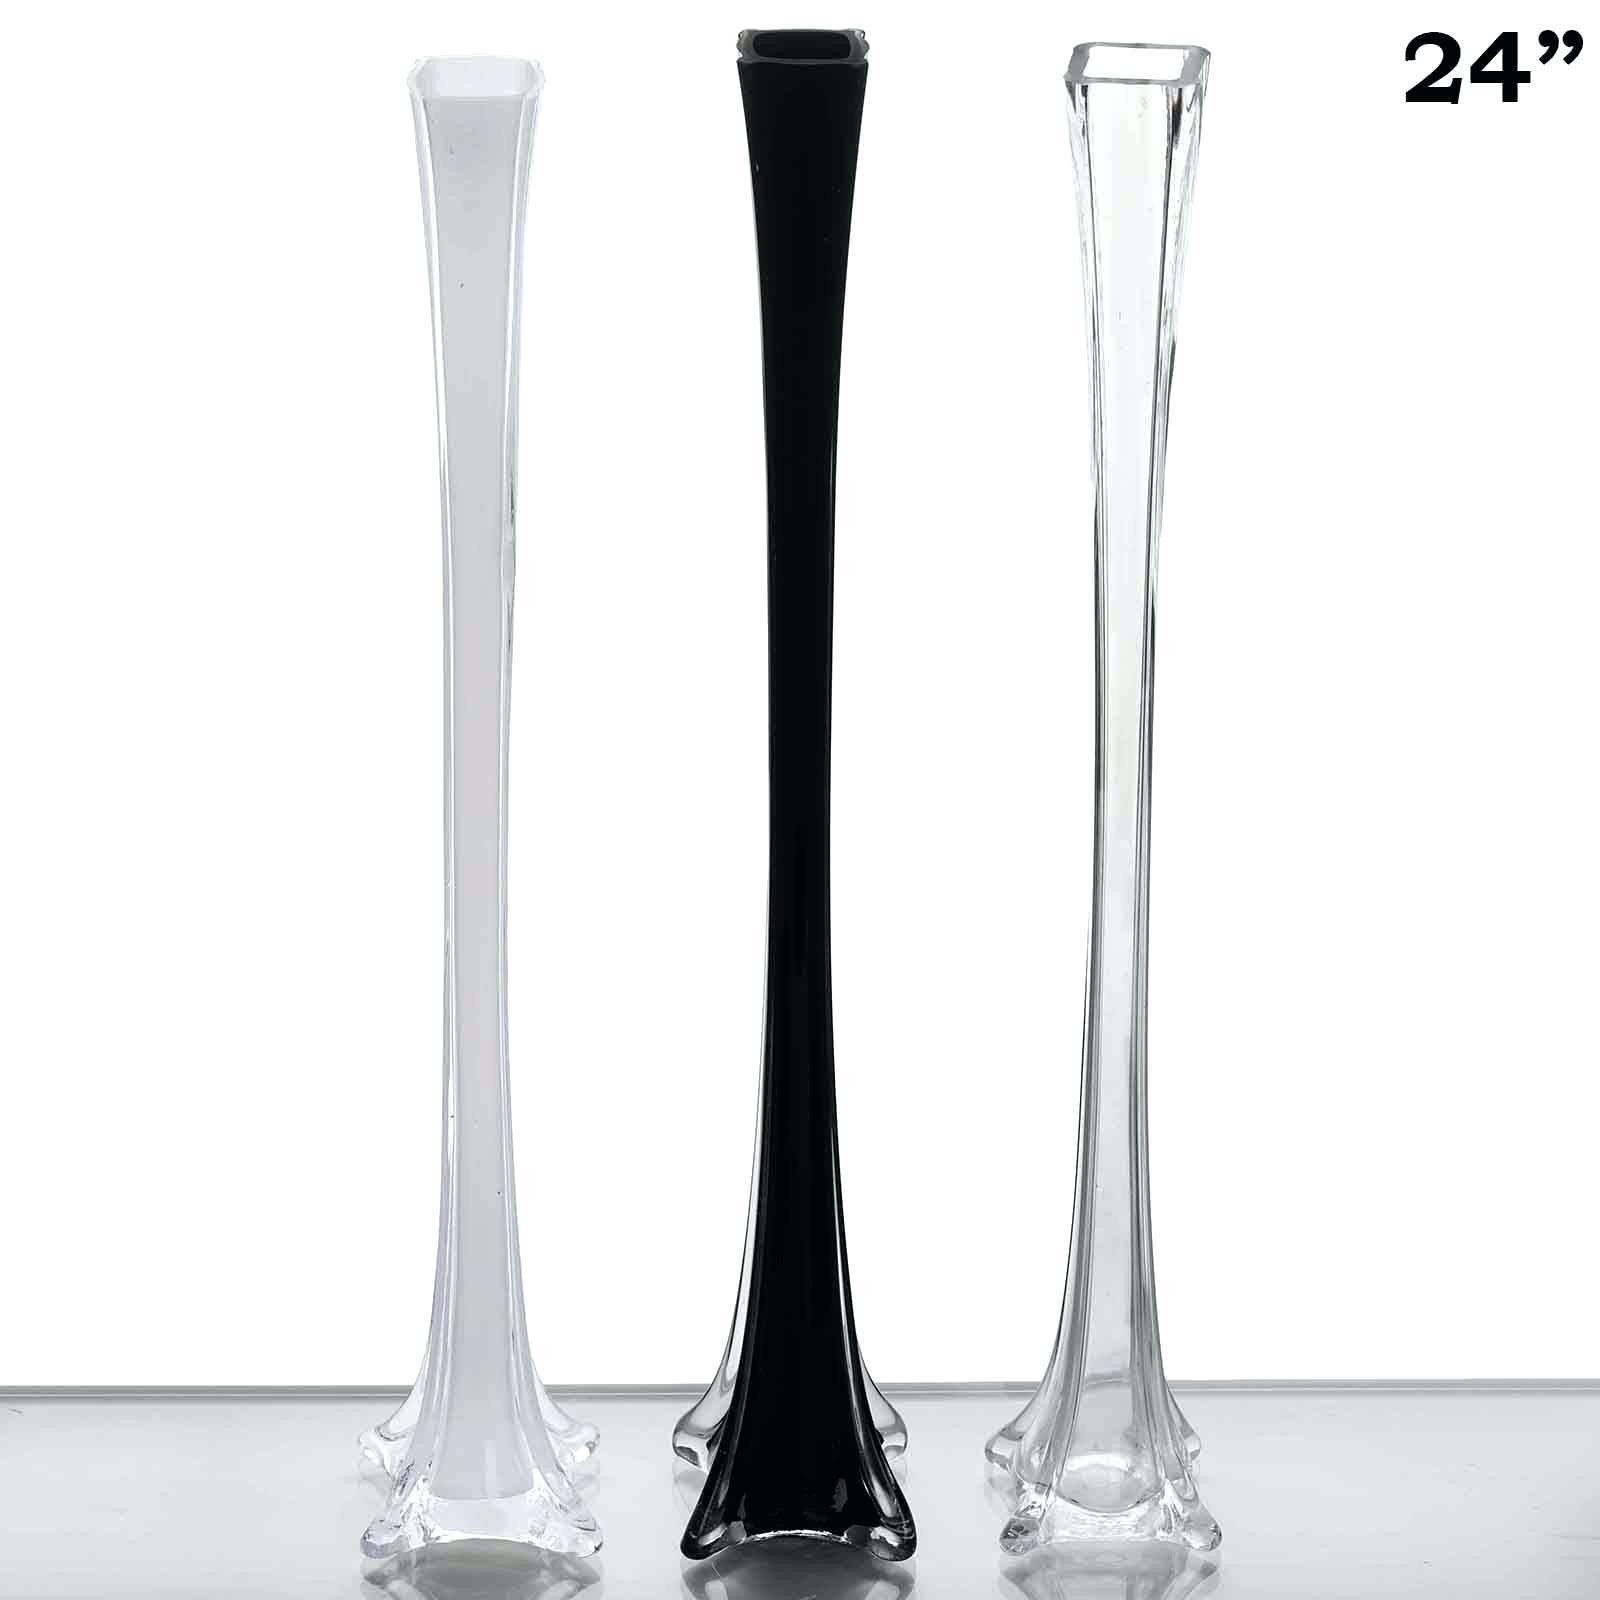 20 cylinder vase wholesale of black glass vases stock fantastic chair decor ideas from living room in black glass vases stock fantastic chair decor ideas from living room vases wholesale awesome